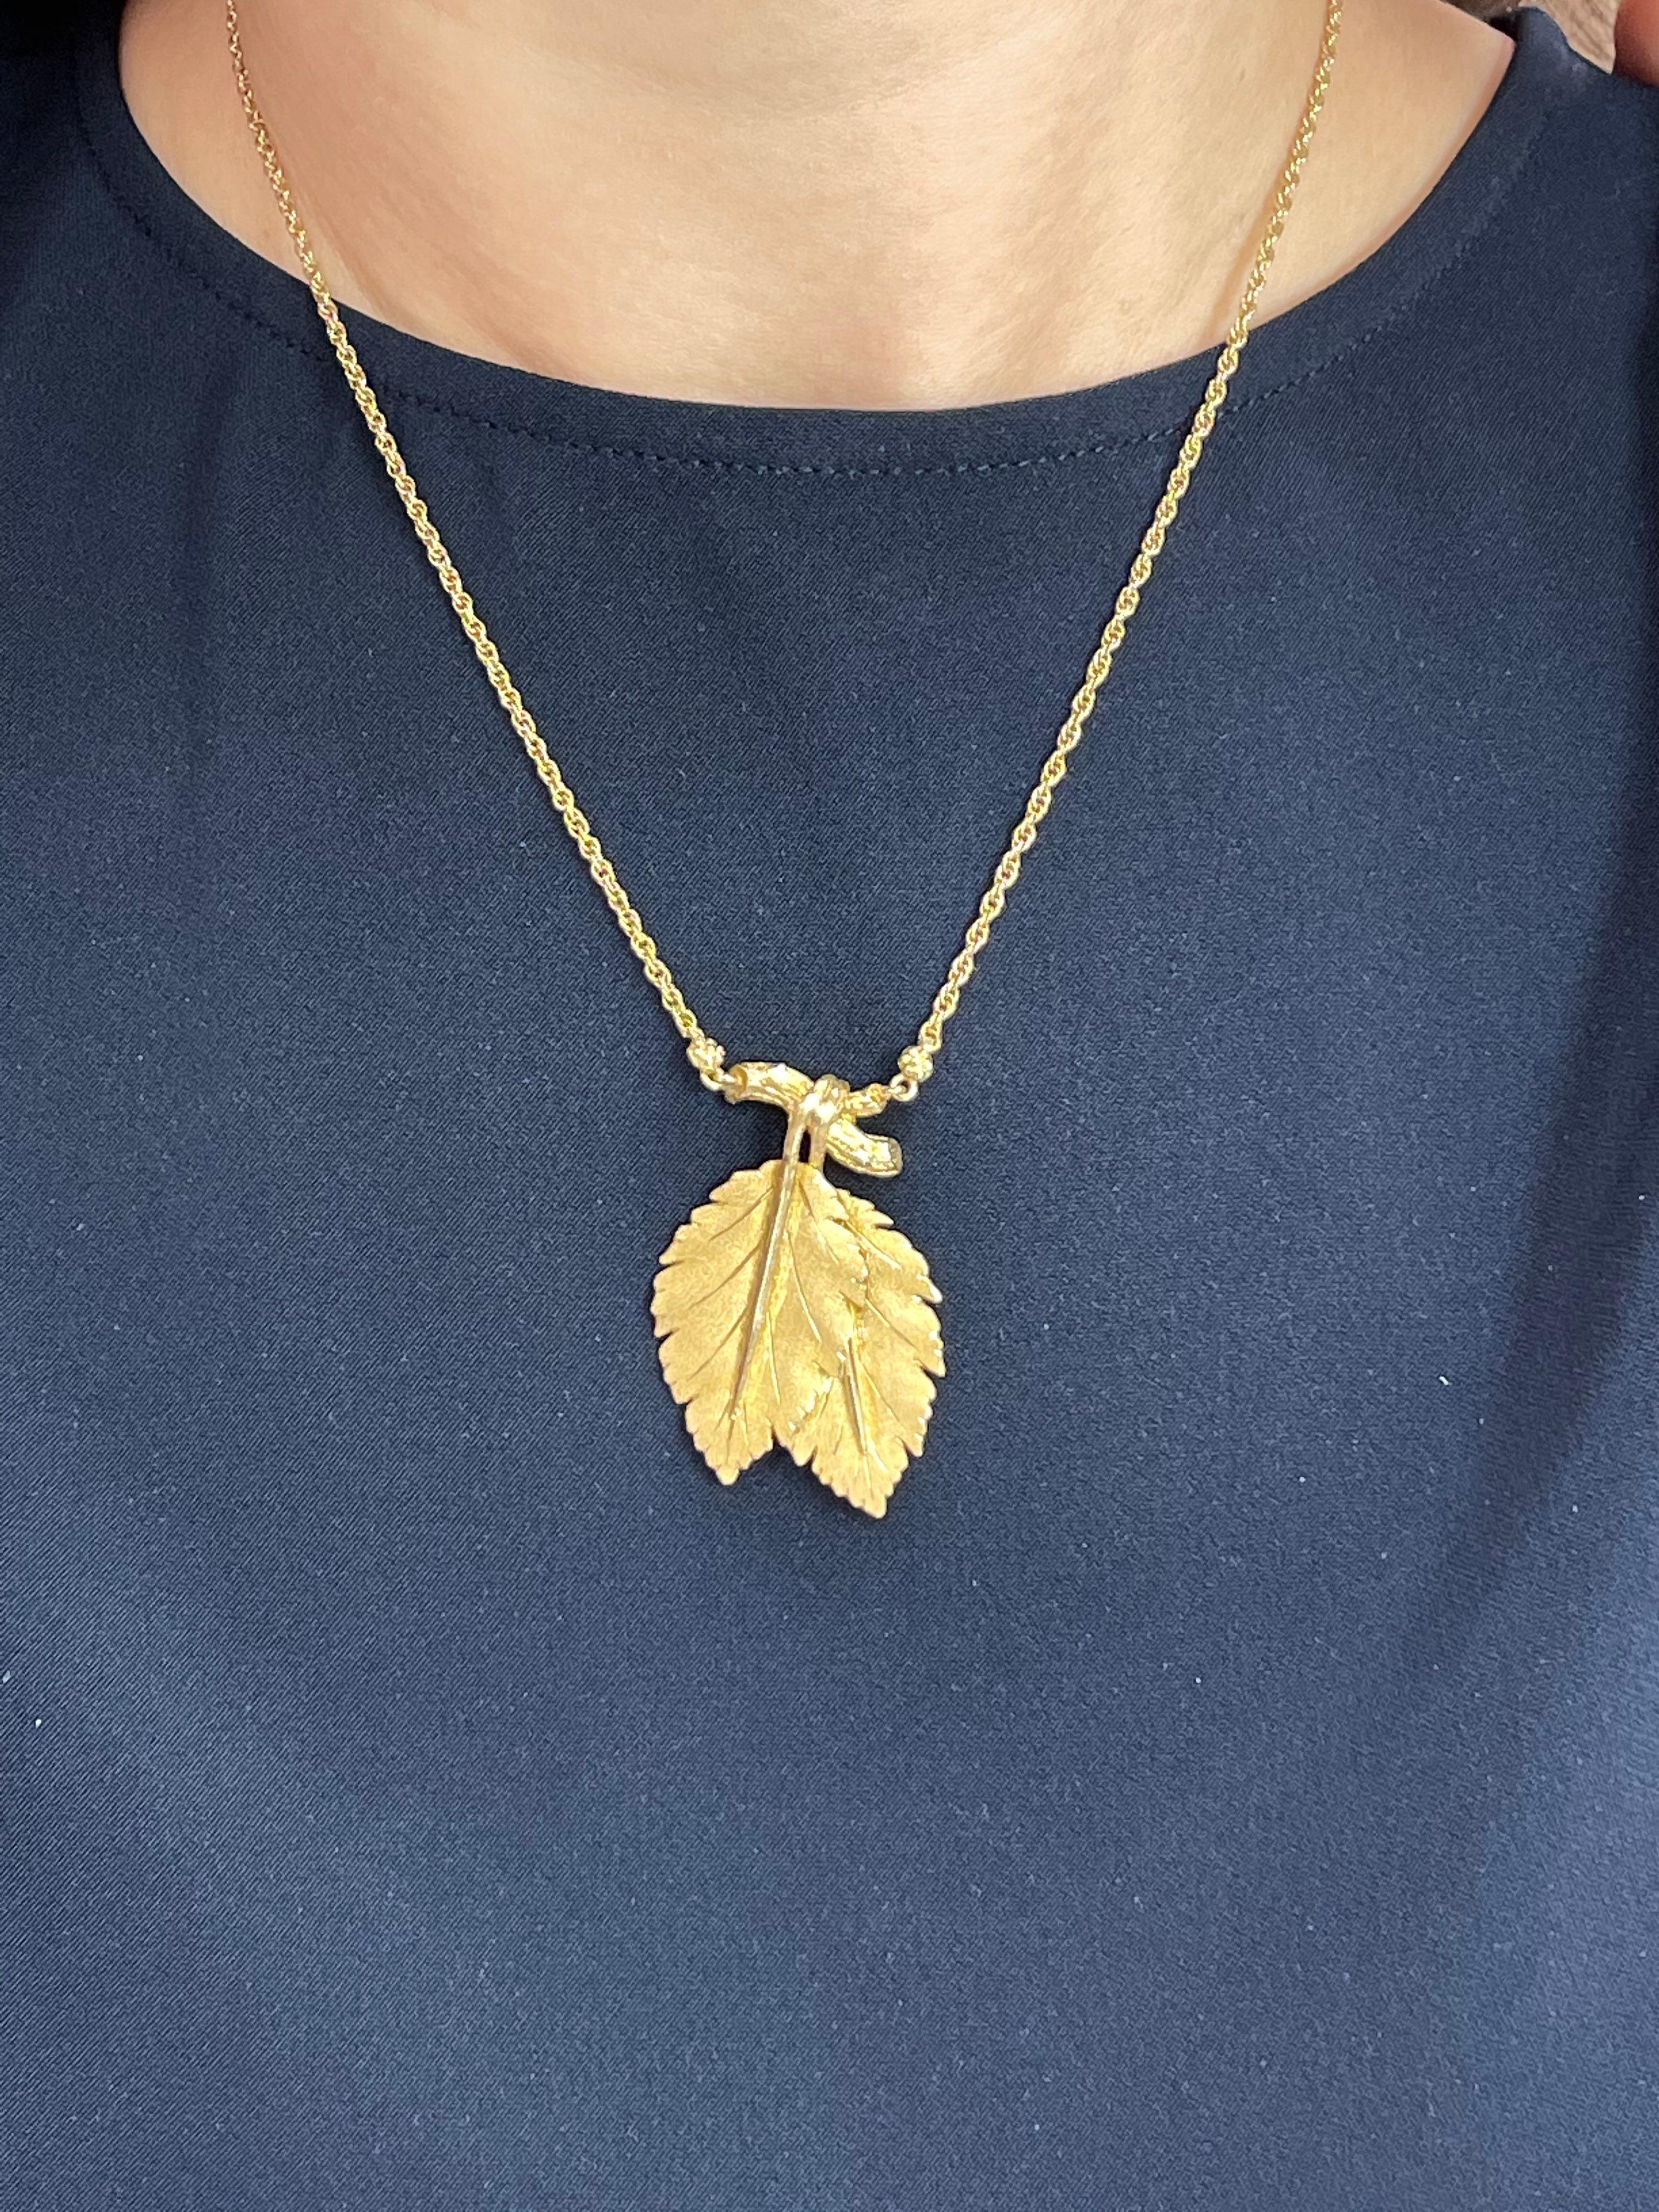 Buccellati, Federico 18K Yellow Gold Leaves and Twigs Pendant Drop Necklace  2